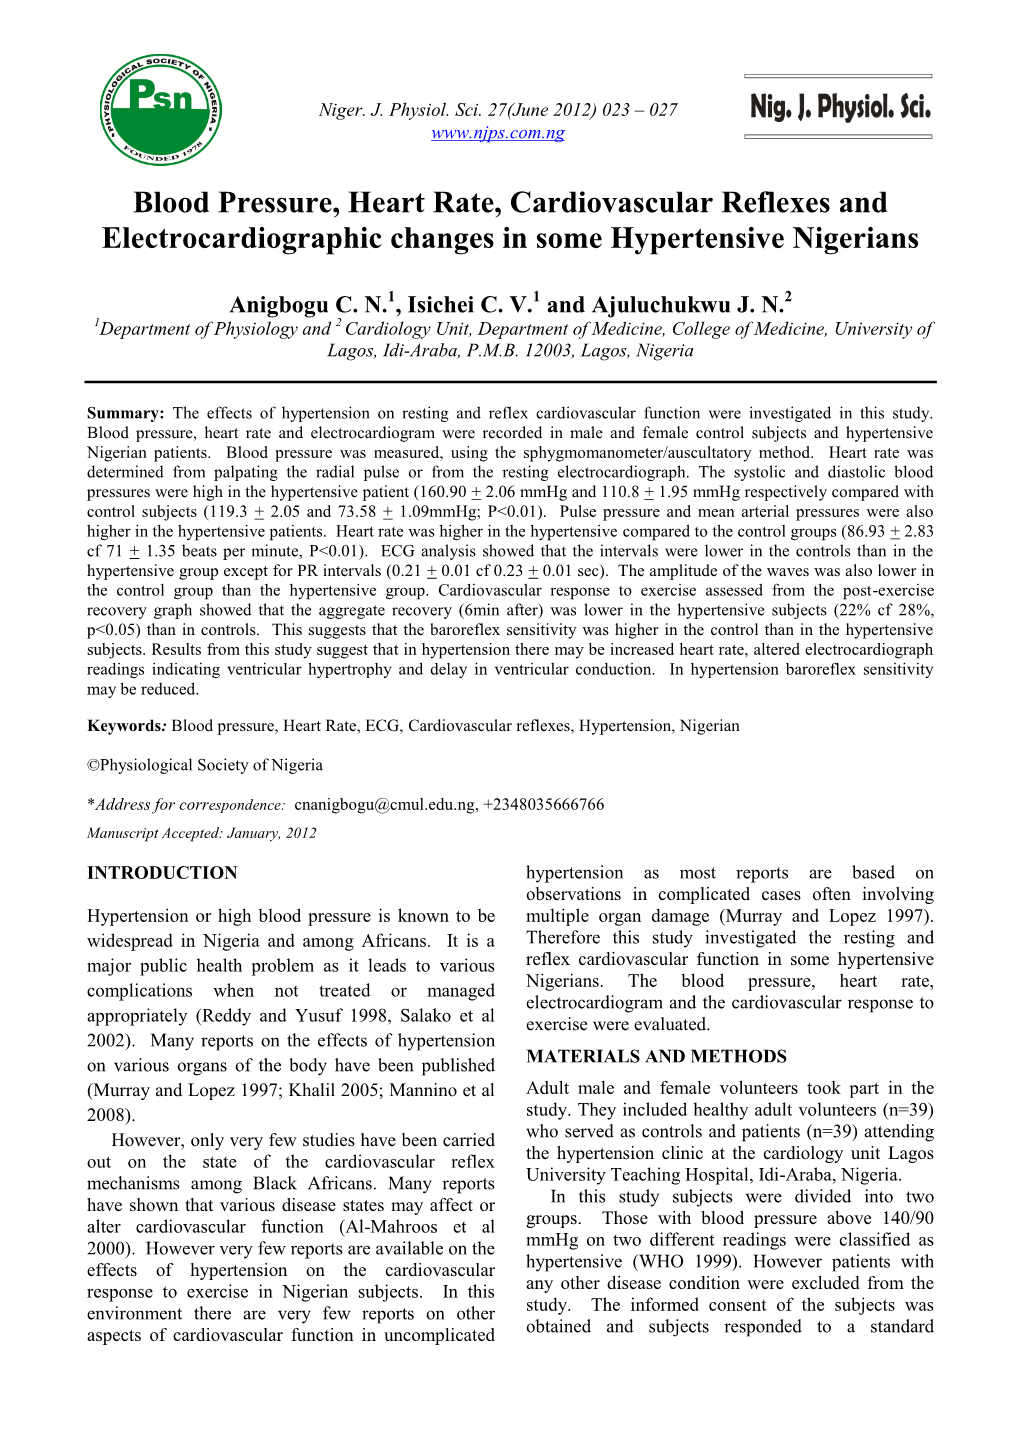 Blood Pressure, Heart Rate, Cardiovascular Reflexes and Electrocardiographic Changes in Some Hypertensive Nigerians